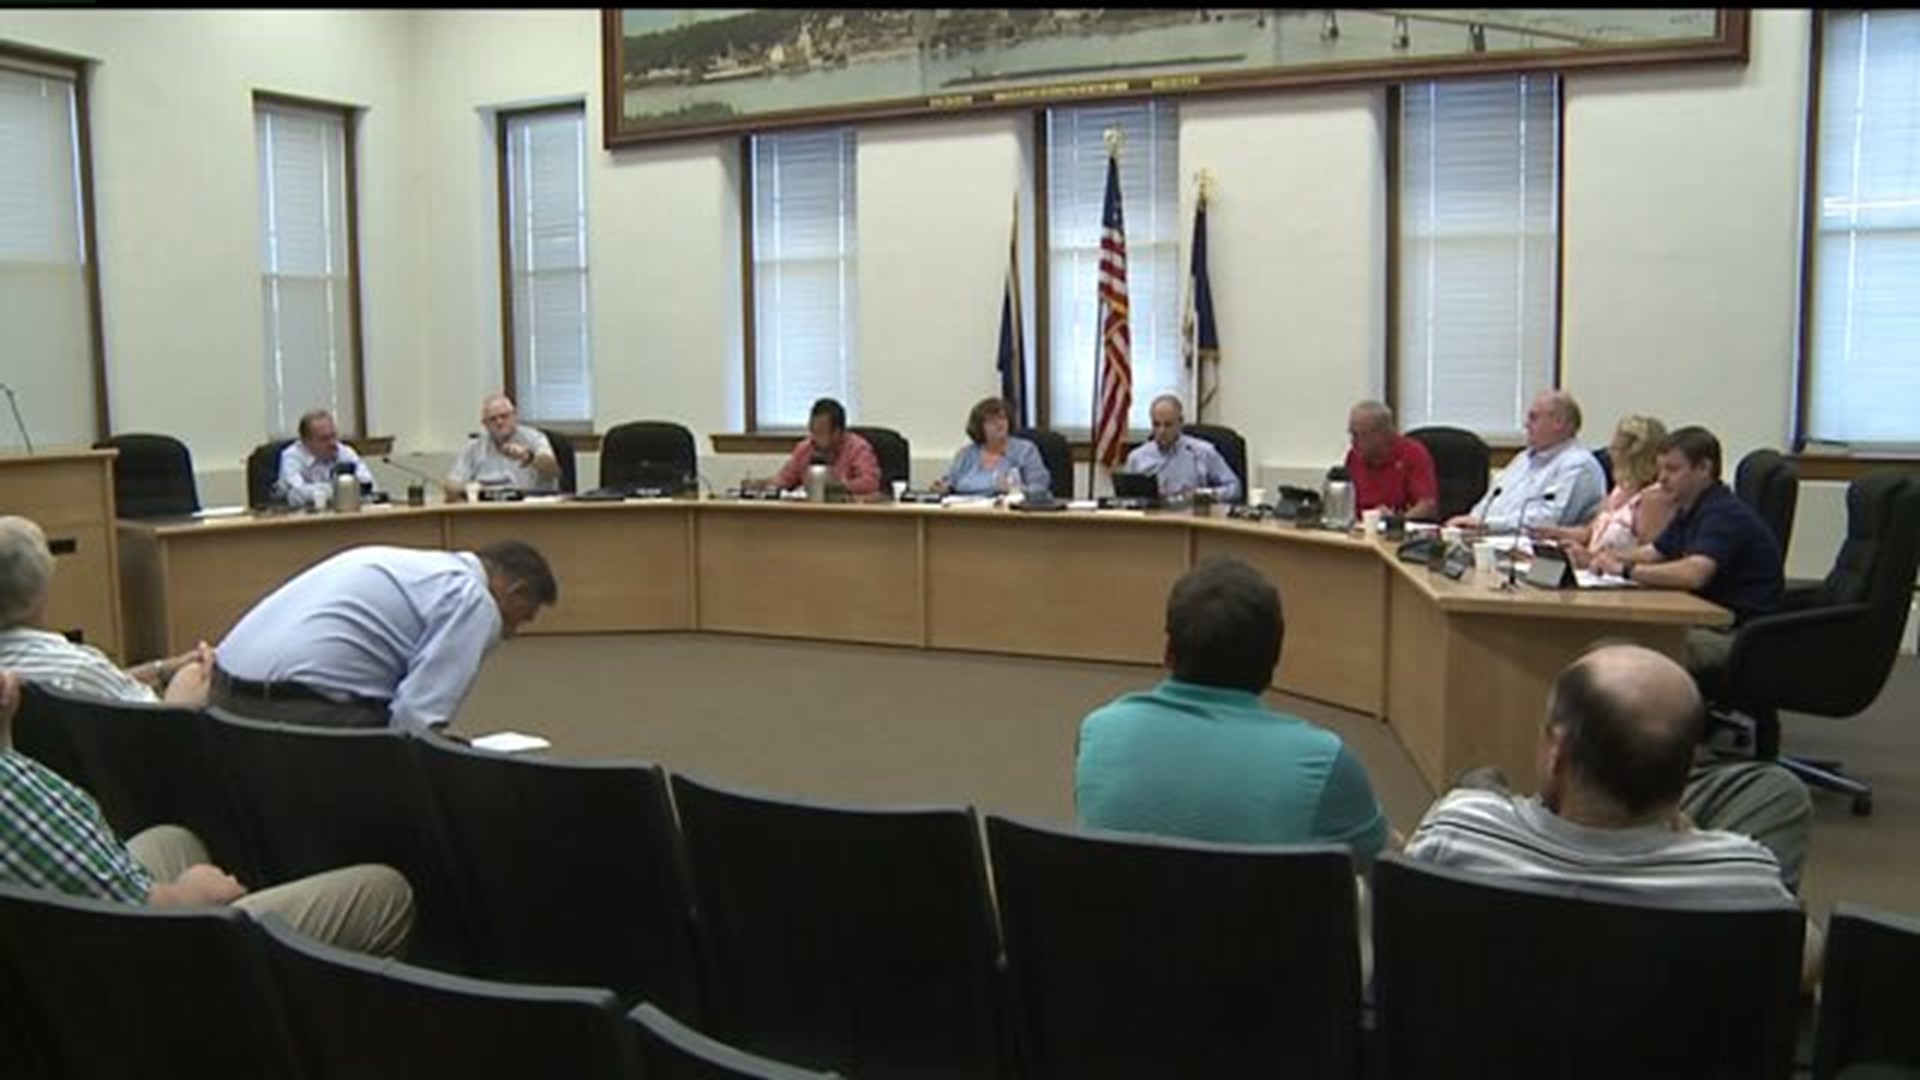 City council approves proposal to change appointing power